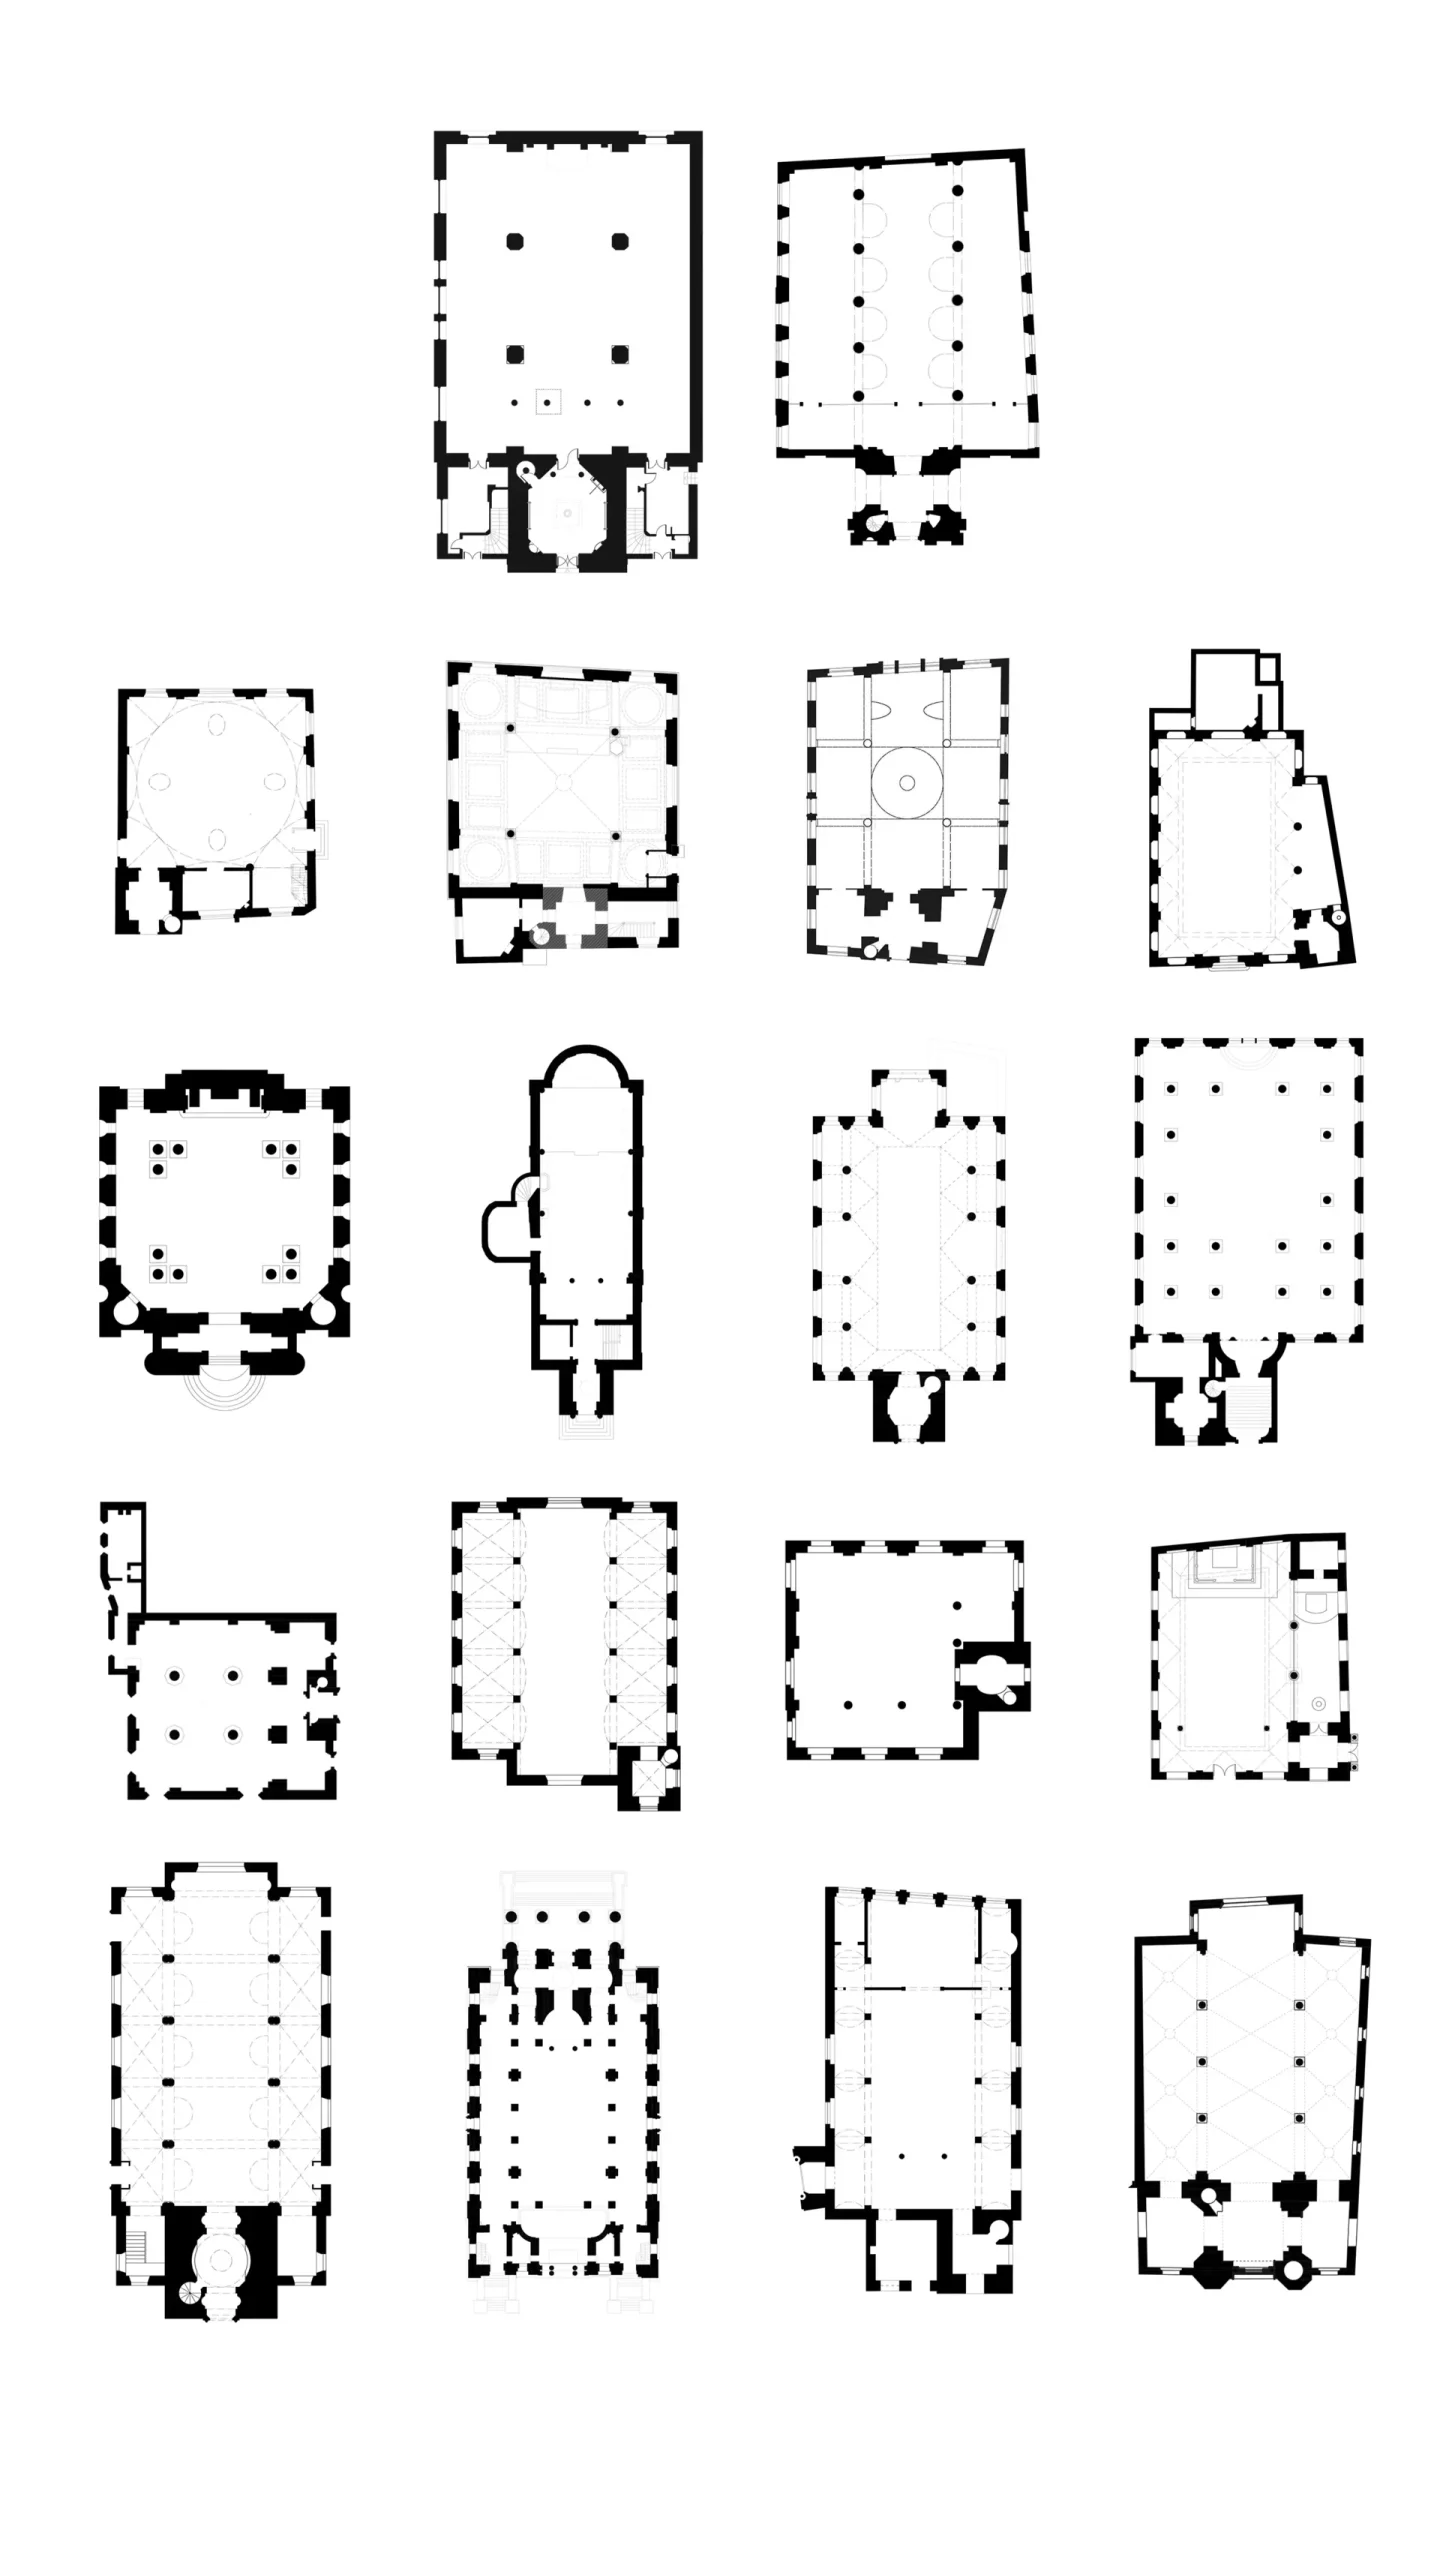 Plans of churches in the City of London, 2014